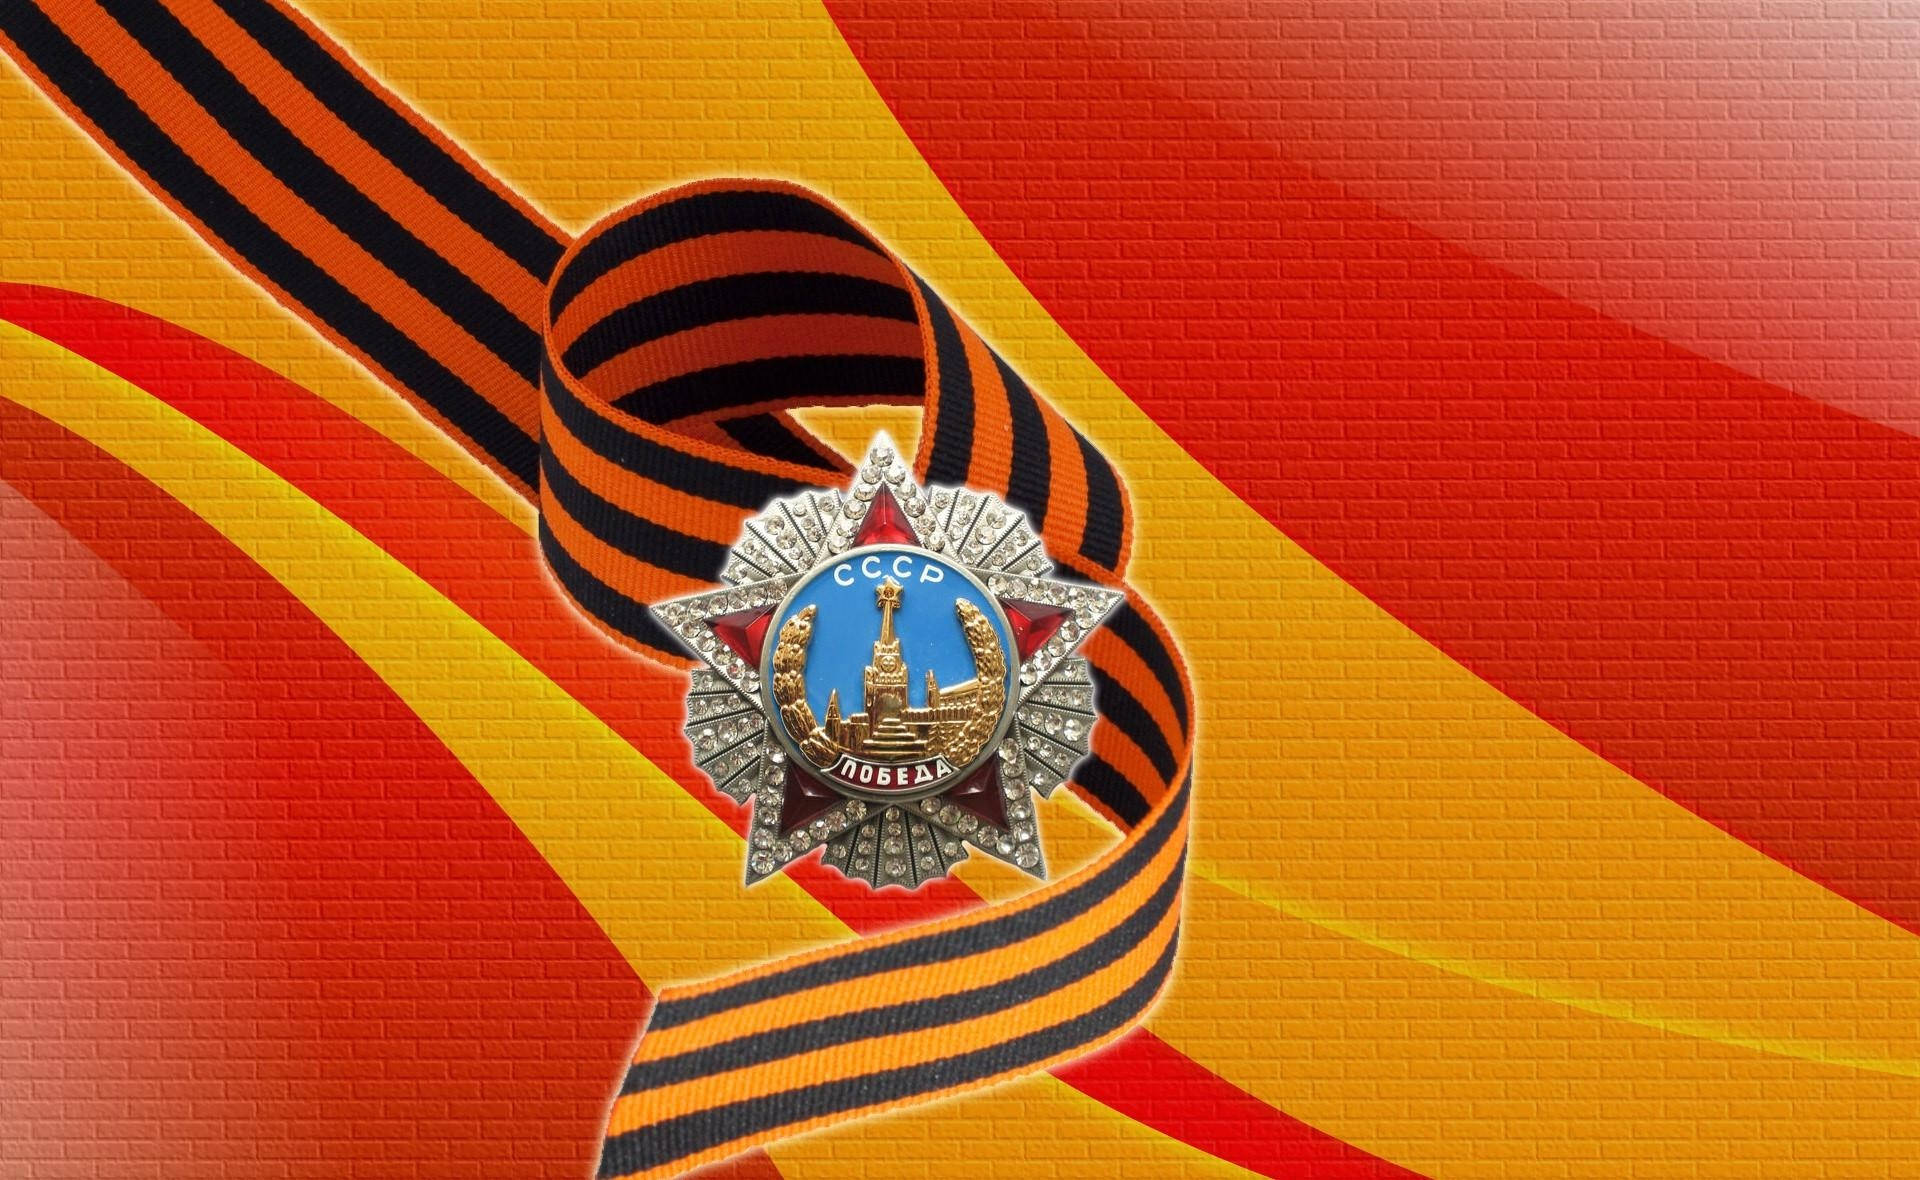 May Soviet Order Of Victory Background